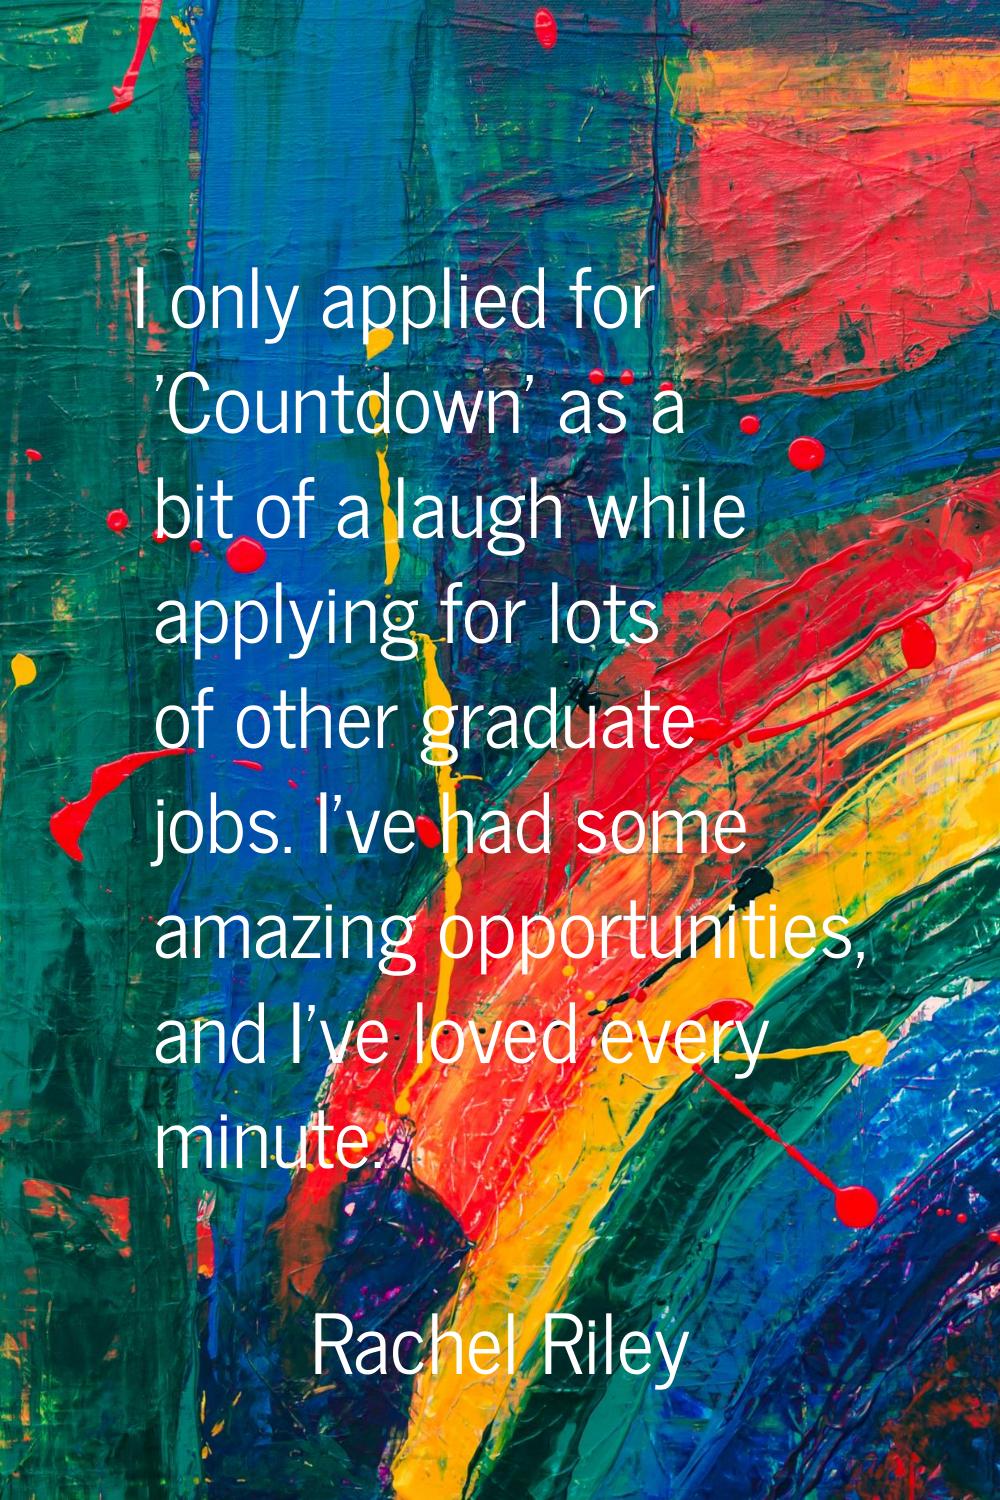 I only applied for 'Countdown' as a bit of a laugh while applying for lots of other graduate jobs. 